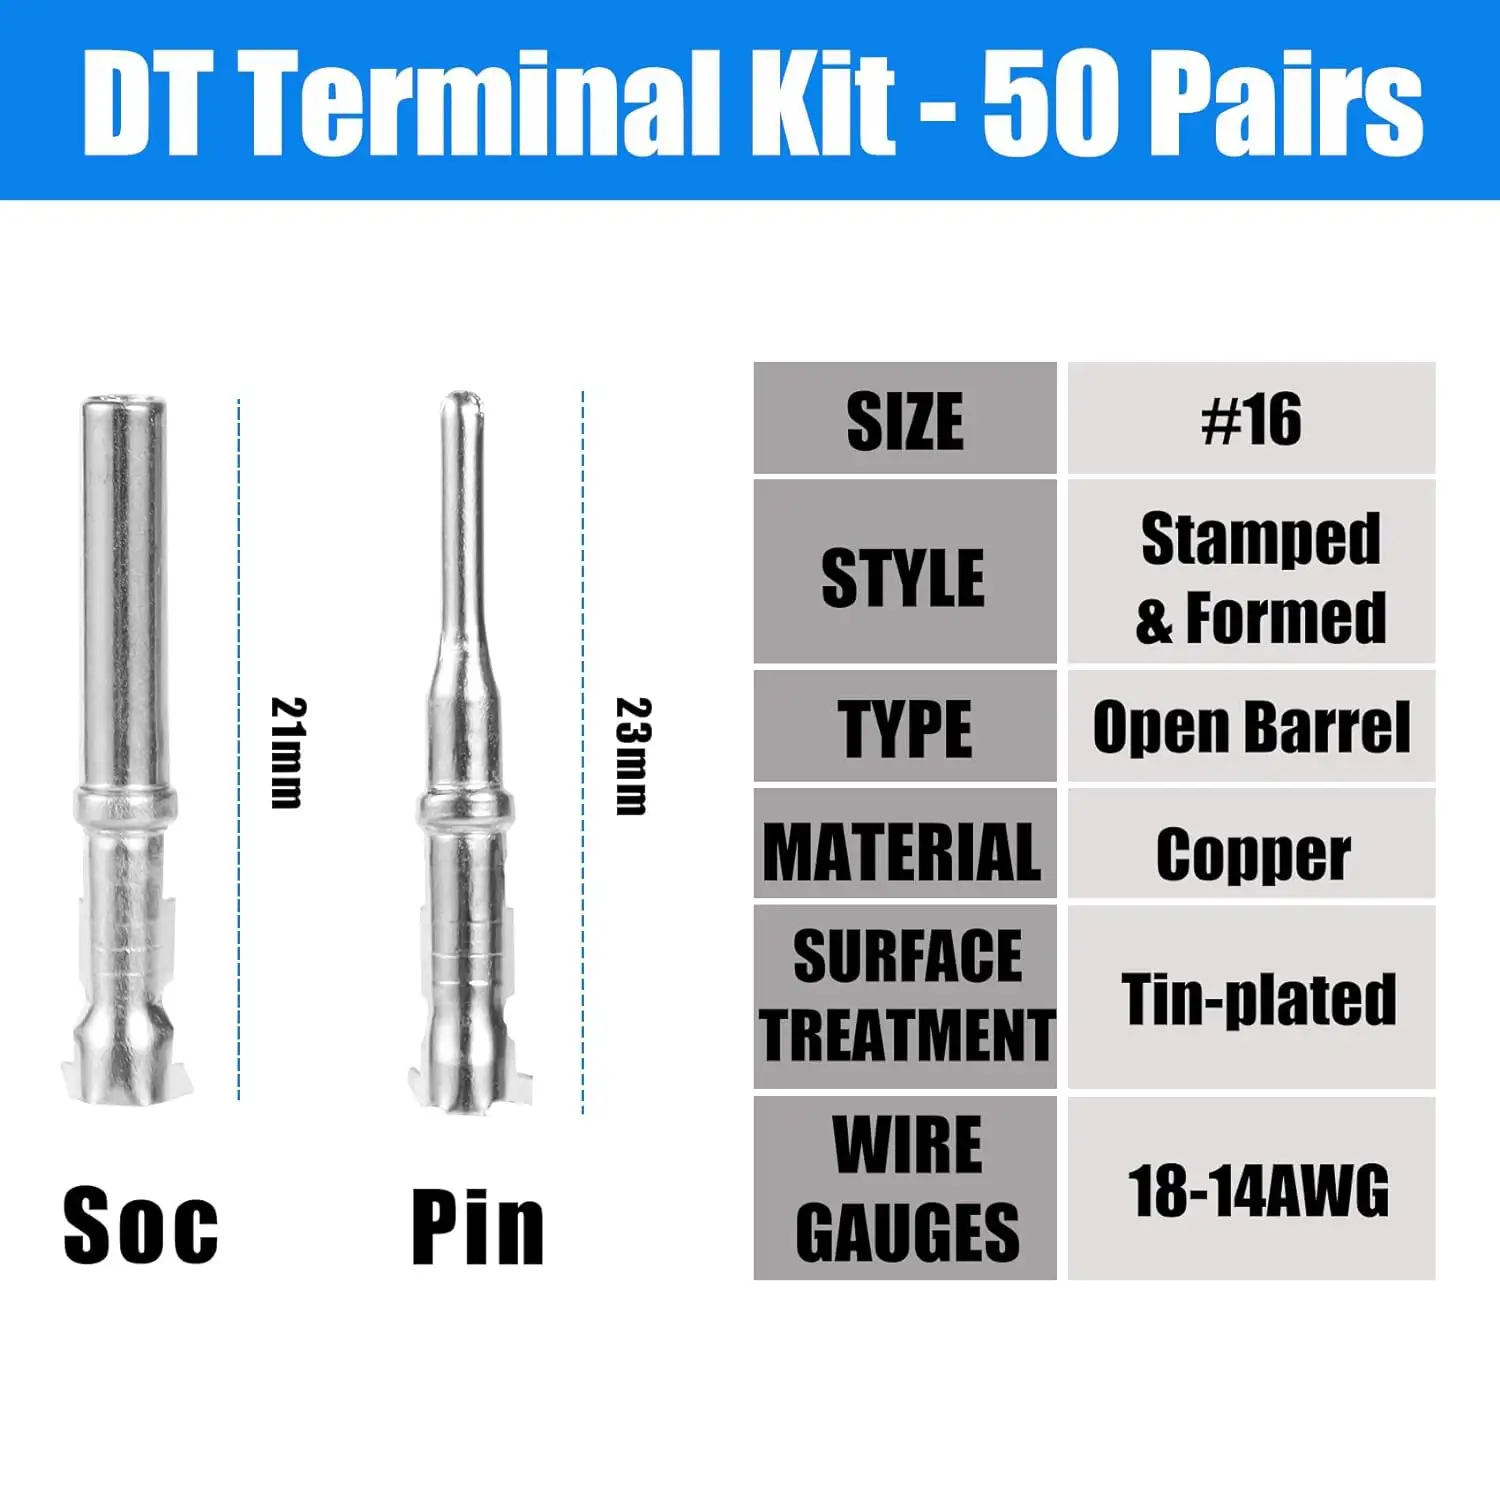 AOWIFT 50 Pairs DT Connector Terminals Kit Size 16 Stamped Contacts Male Pins Female Sockets Replacement Terminal for 18-14AWG